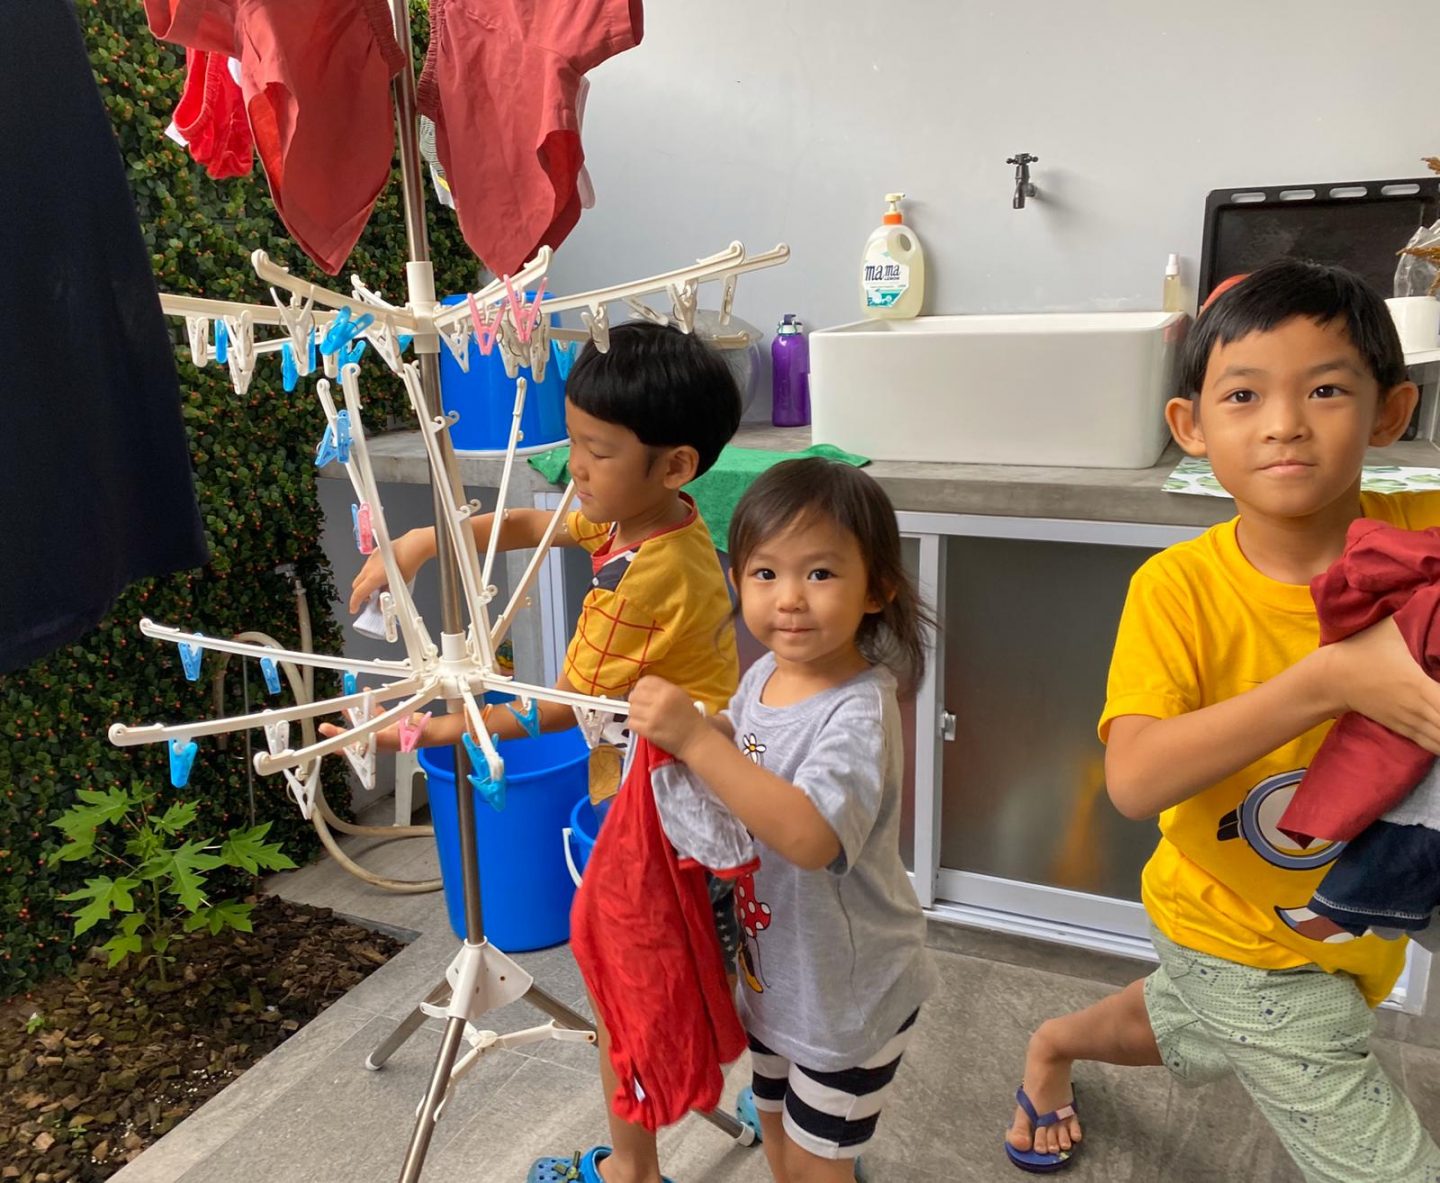 The Tan children – Joshua, Deborah and Michael – working together to put out the laundry 